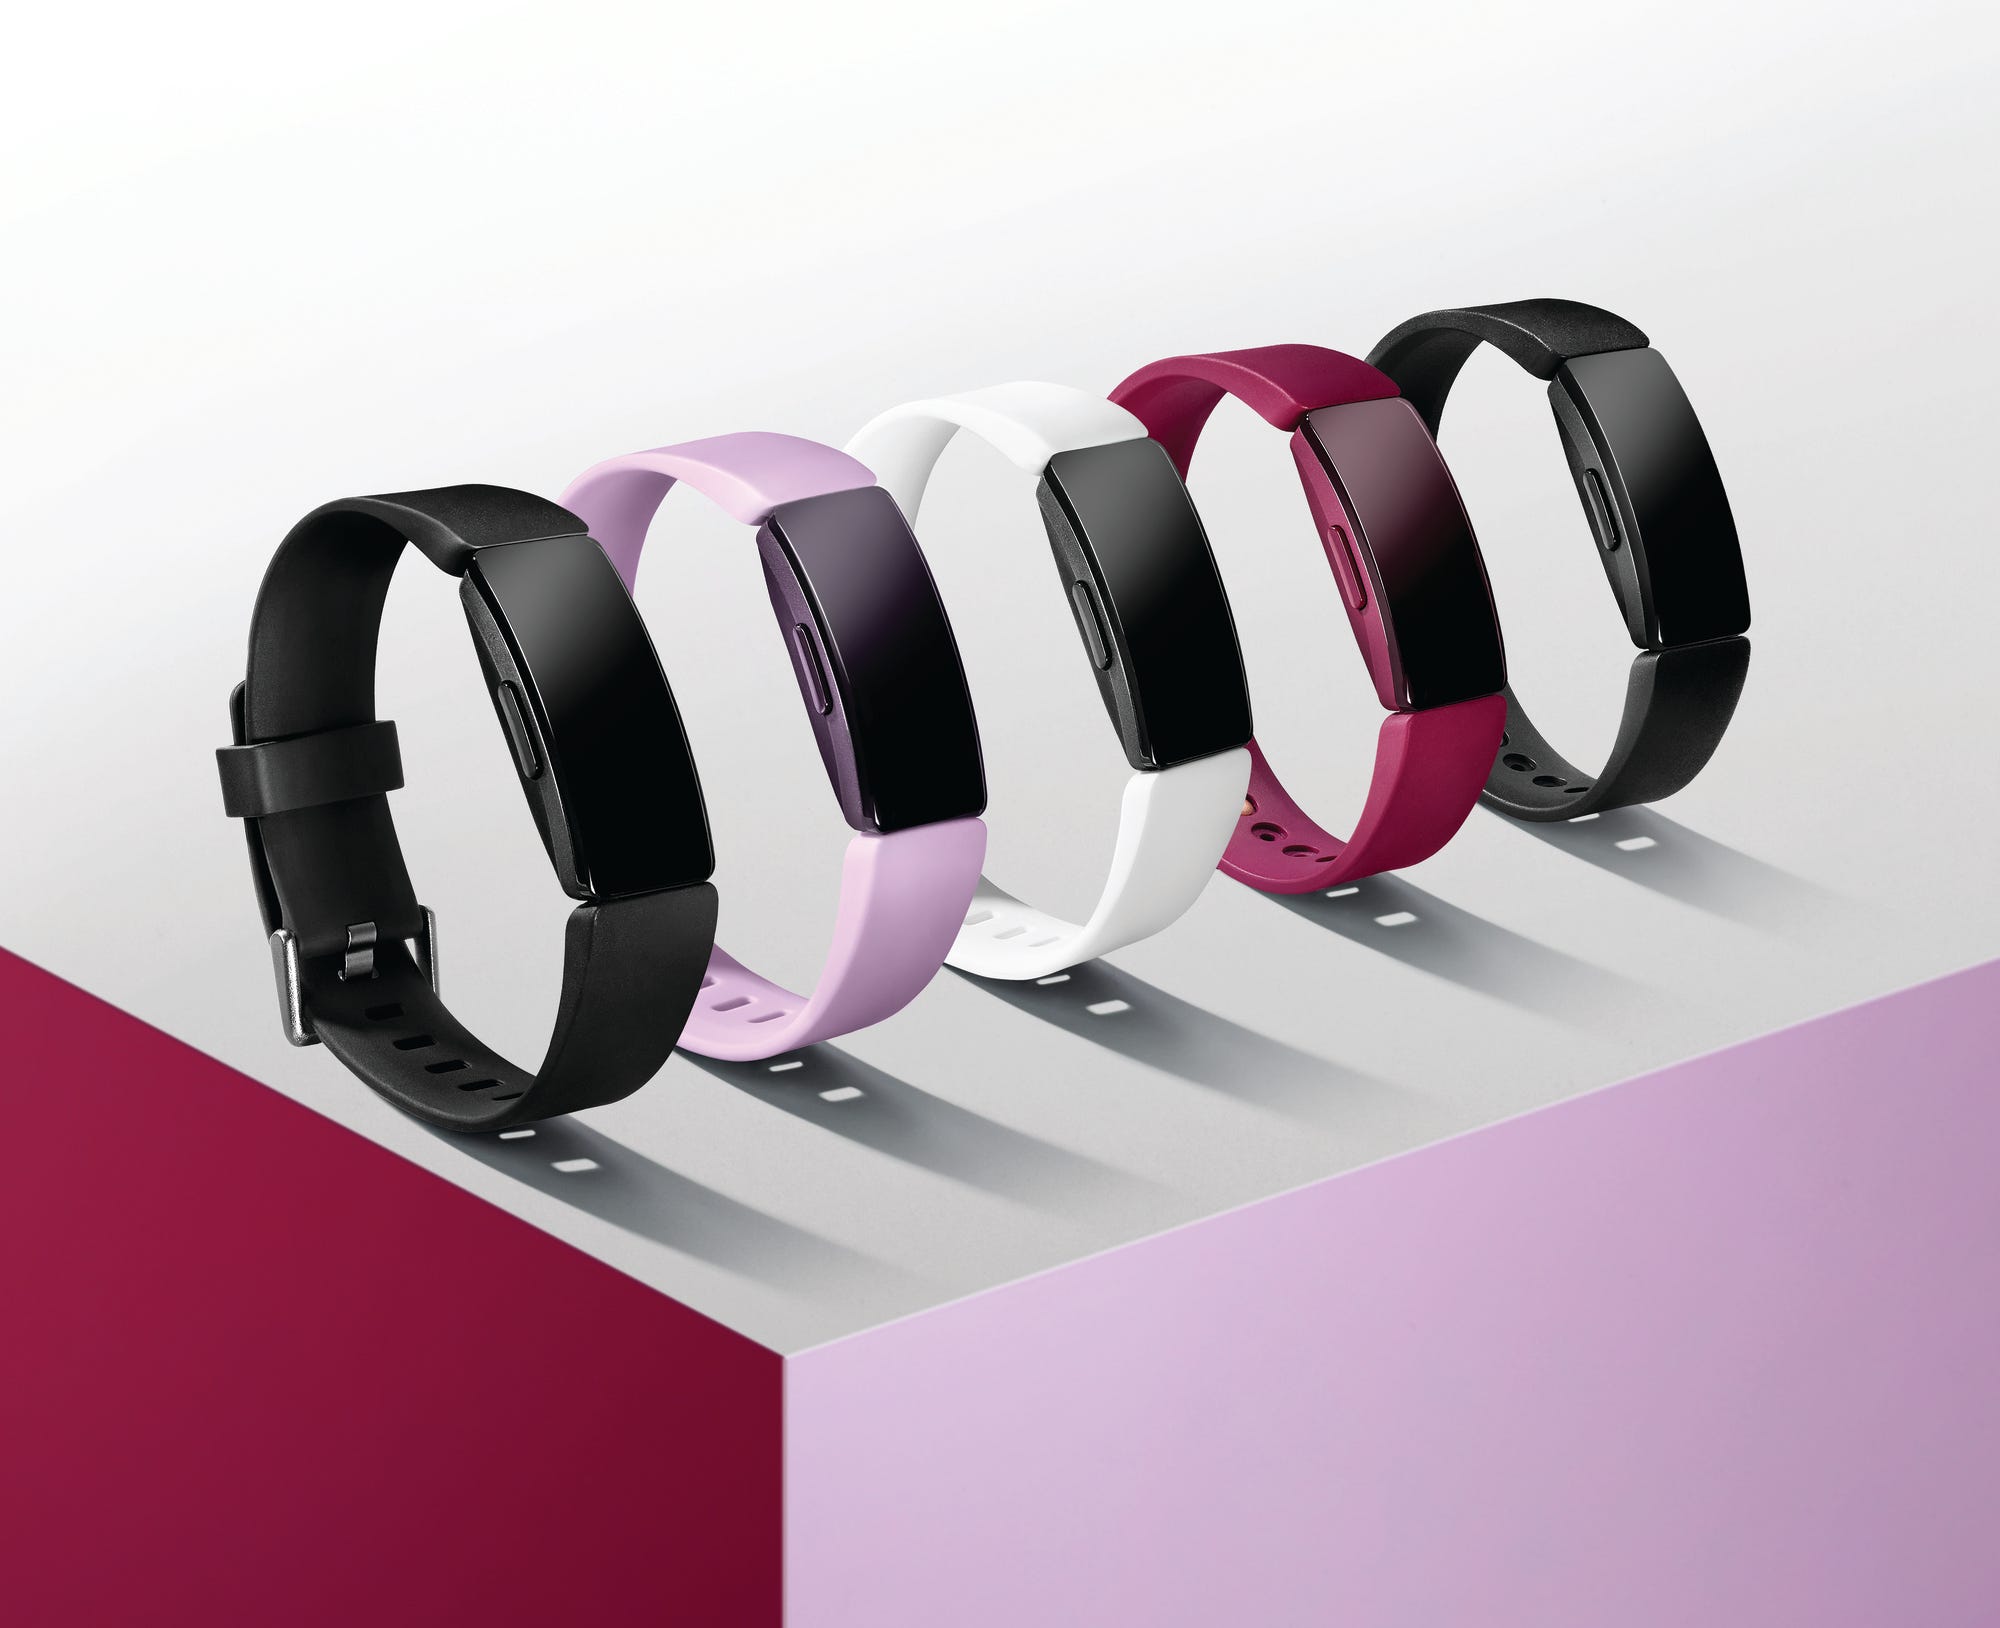 Fitbit launches 4 new devices: Versa Lite, Inspire, Inspire HR & Ace 2